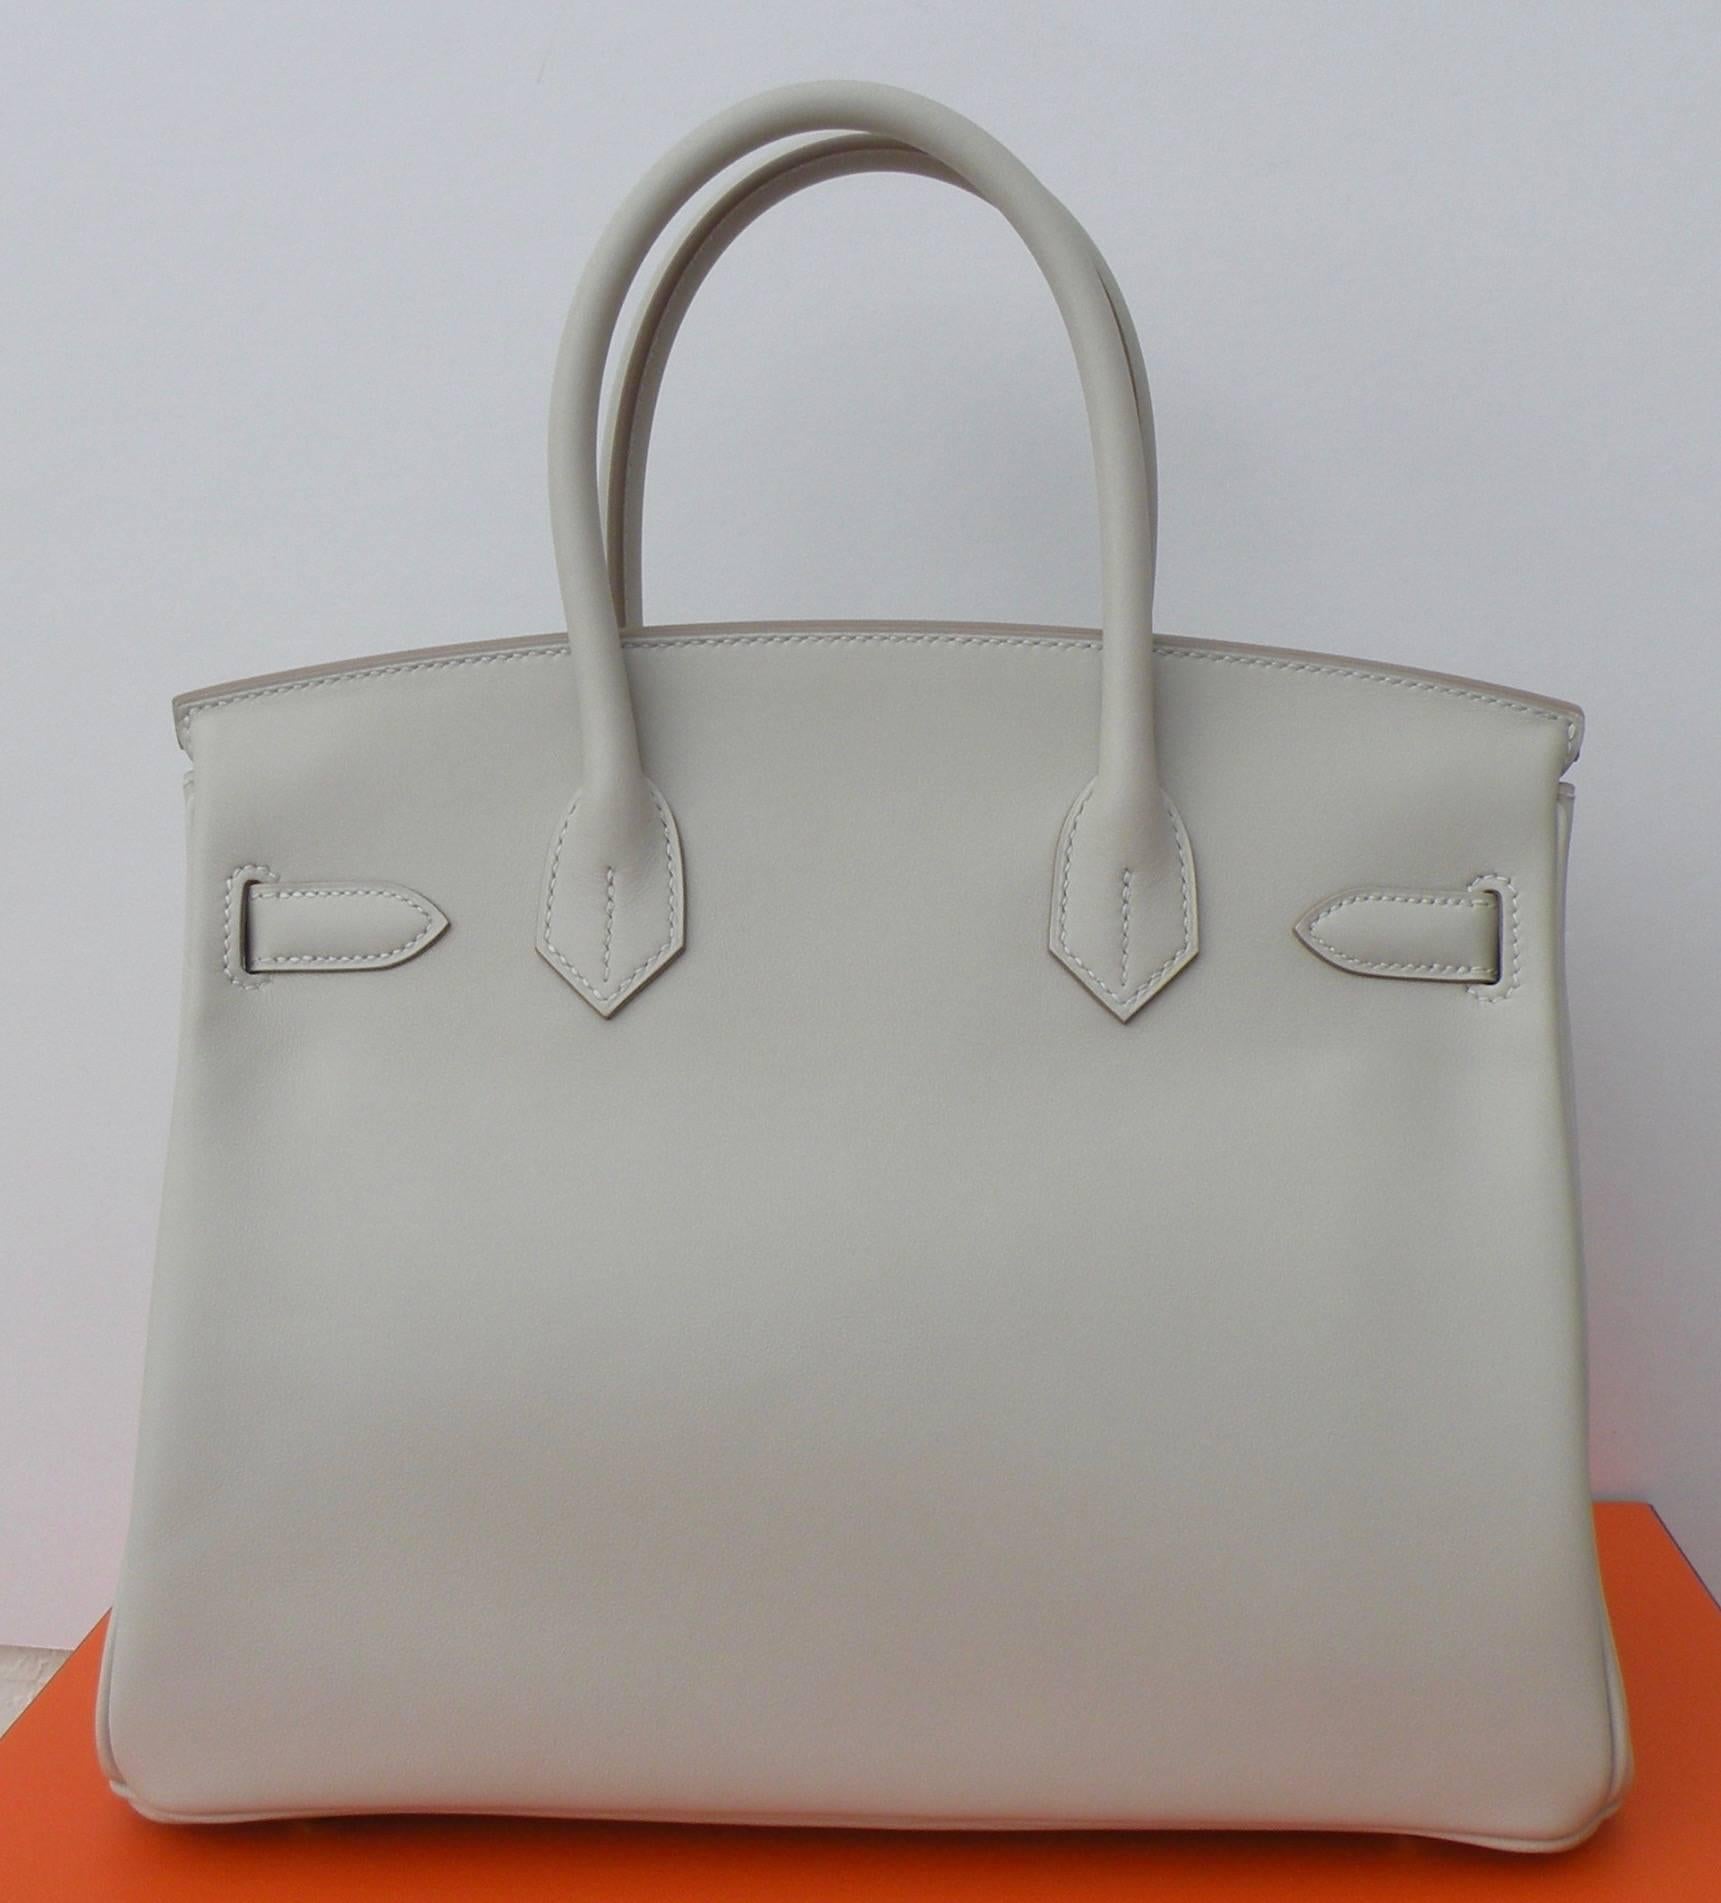 Hermes 30cm Birkin Bag in Beautiful Gris Perle, a light Grey, with contrasting Gold Hardware, makes this bag stunning!
Leather: Smooth Swift Leather
Hardware:  Gold
Size: 30cm 
12" Width x 8" Height x 6” Depth
New never worn
Comes with